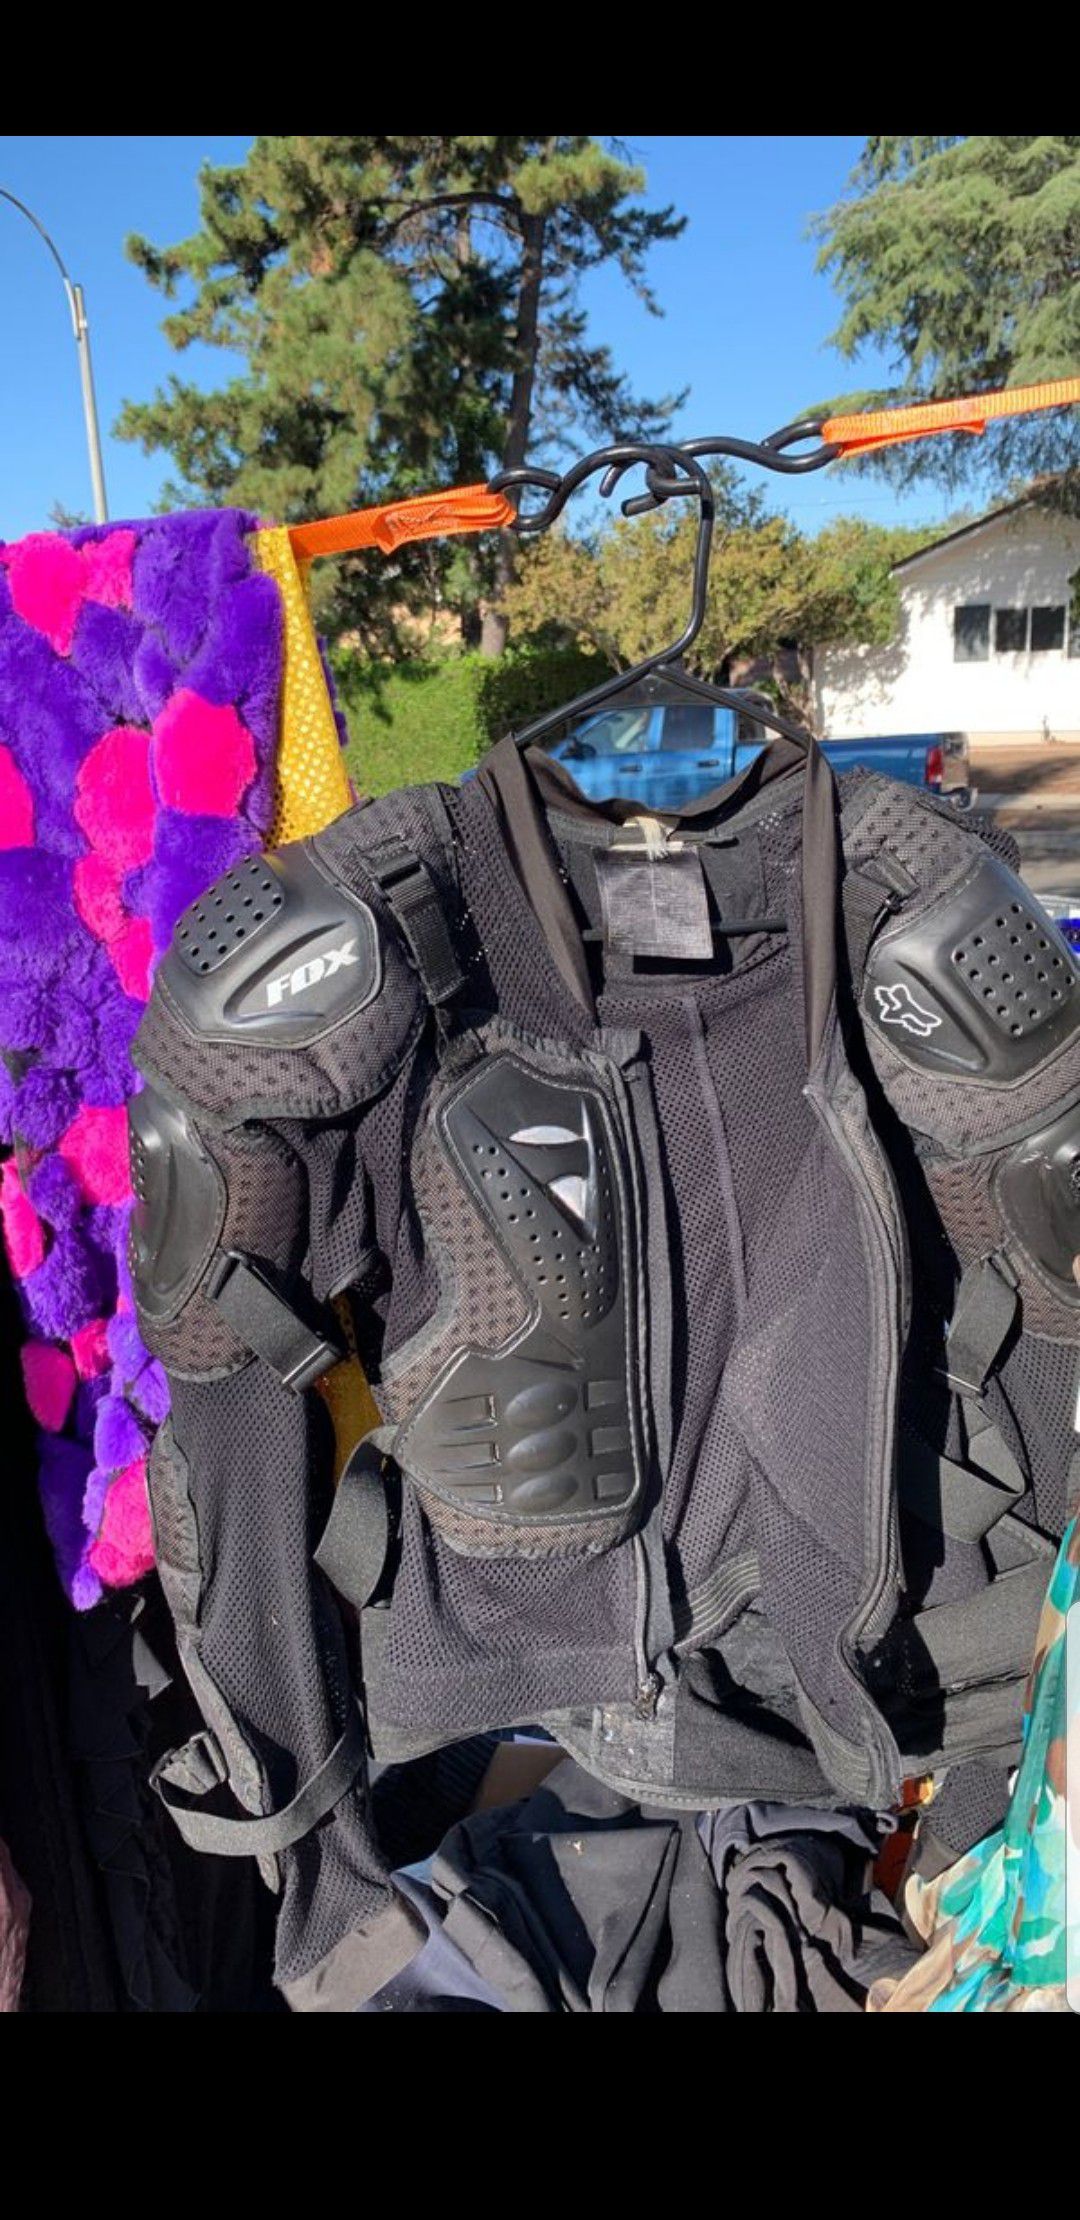 XL Motorcycle Jacket For SALE